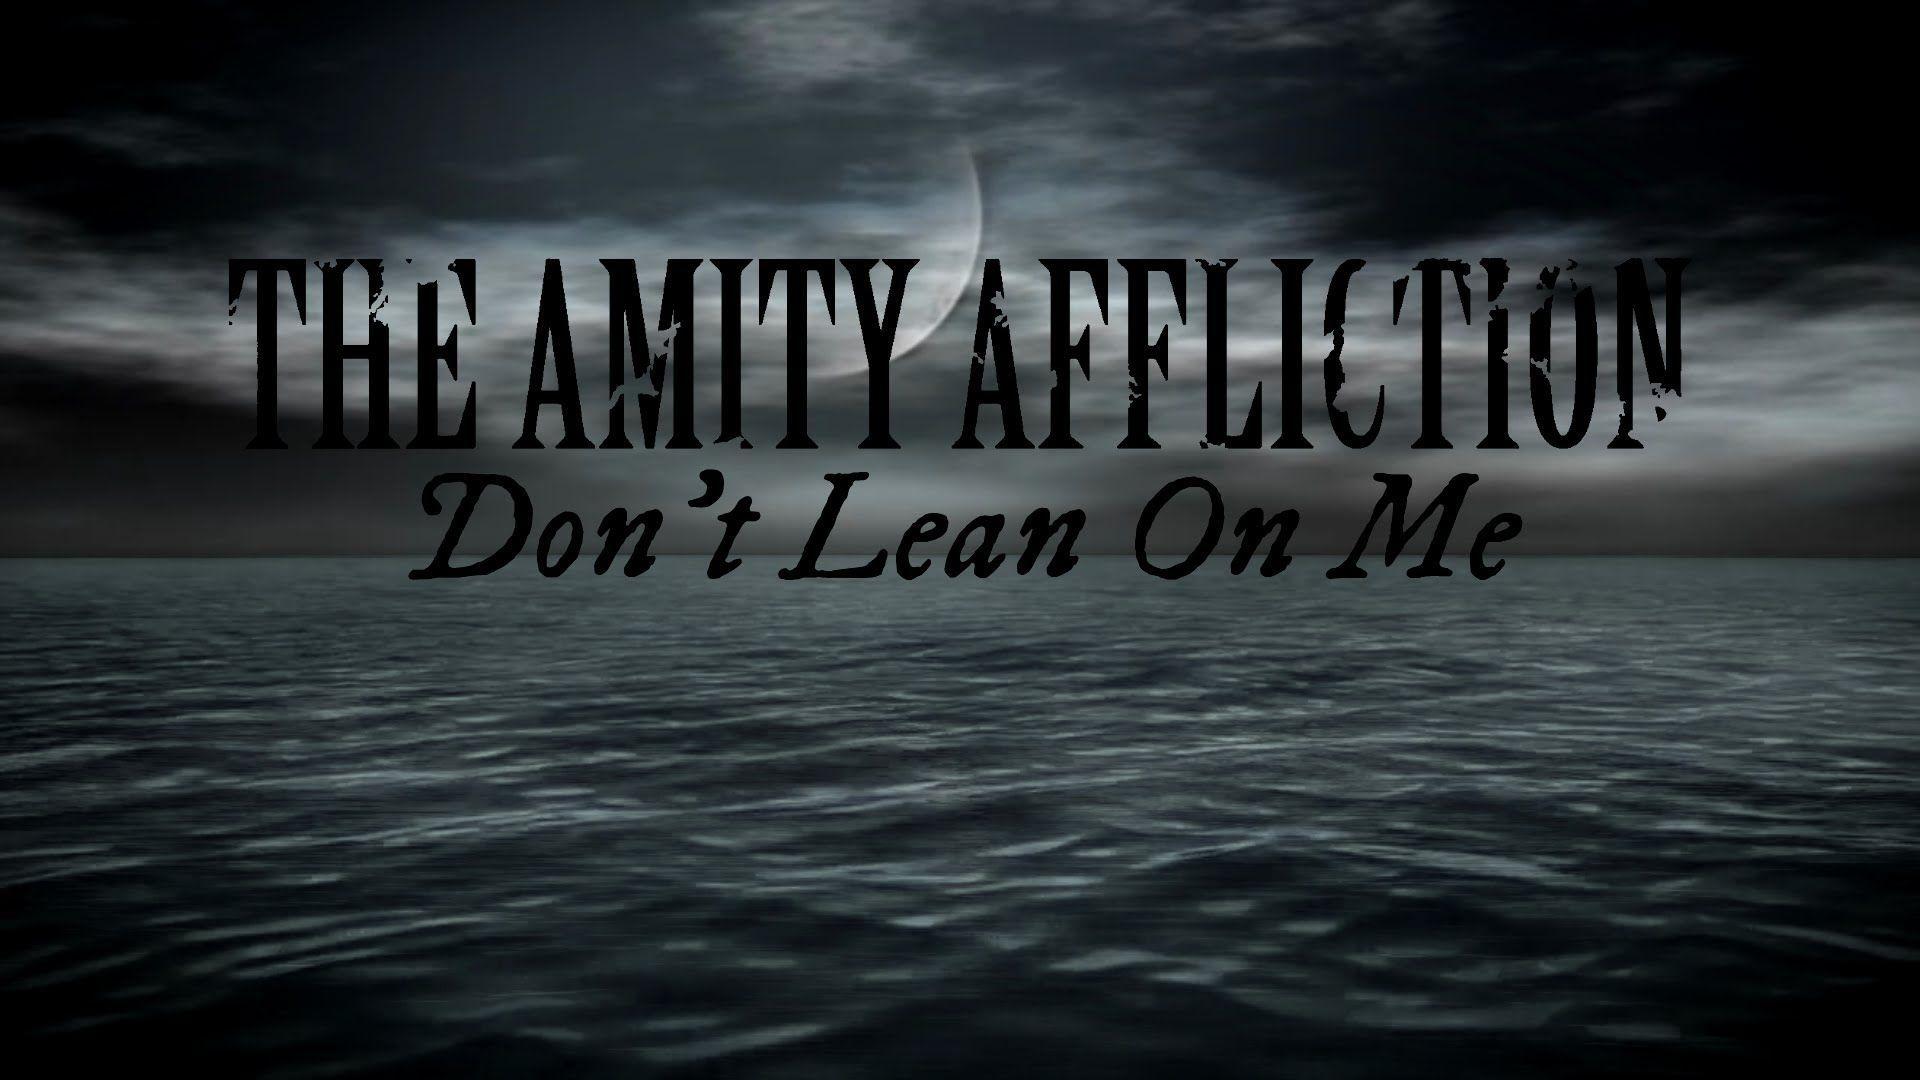 The Amity Affliction't Lean on Me (Lyric Video)